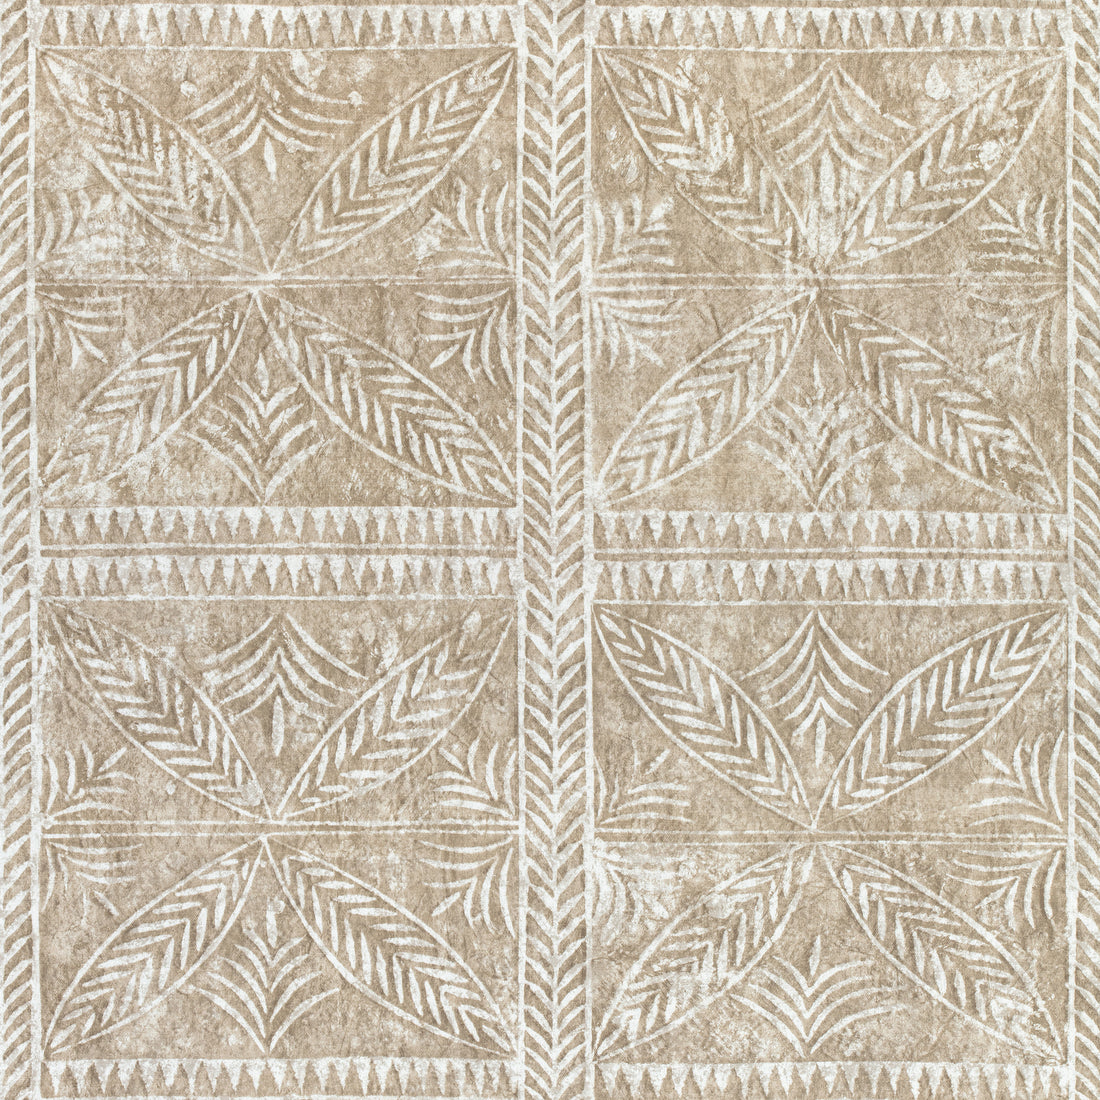 Timbuktu fabric in beige color - pattern number F910256 - by Thibaut in the Colony collection